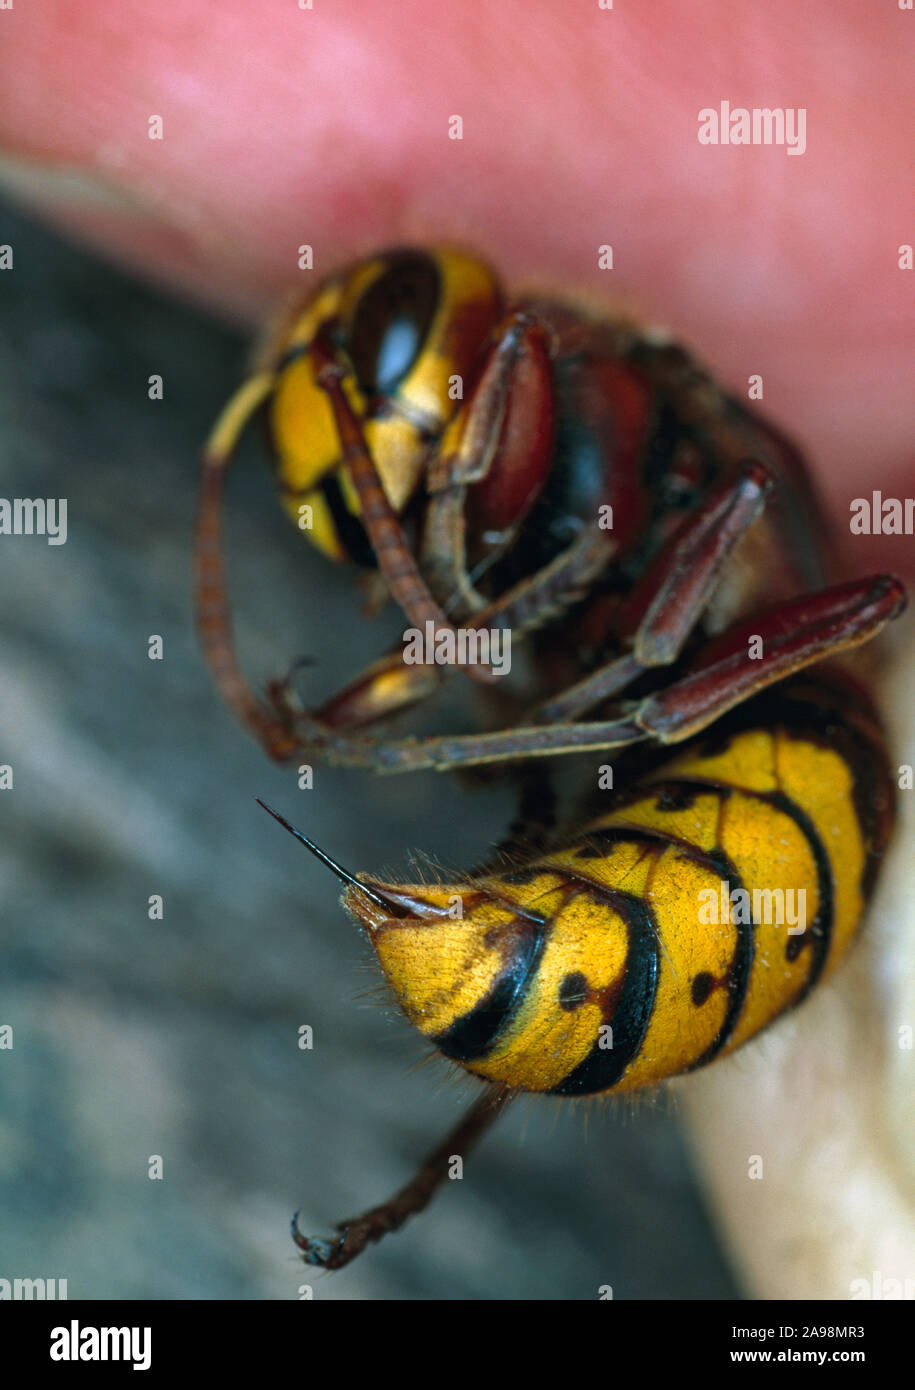 HORNET (Vespa crabro), Held betwen two fingers to show abdomen & stinging mechanism ovipositor protruding from the black and yellow abdomen tail tip. Stock Photo